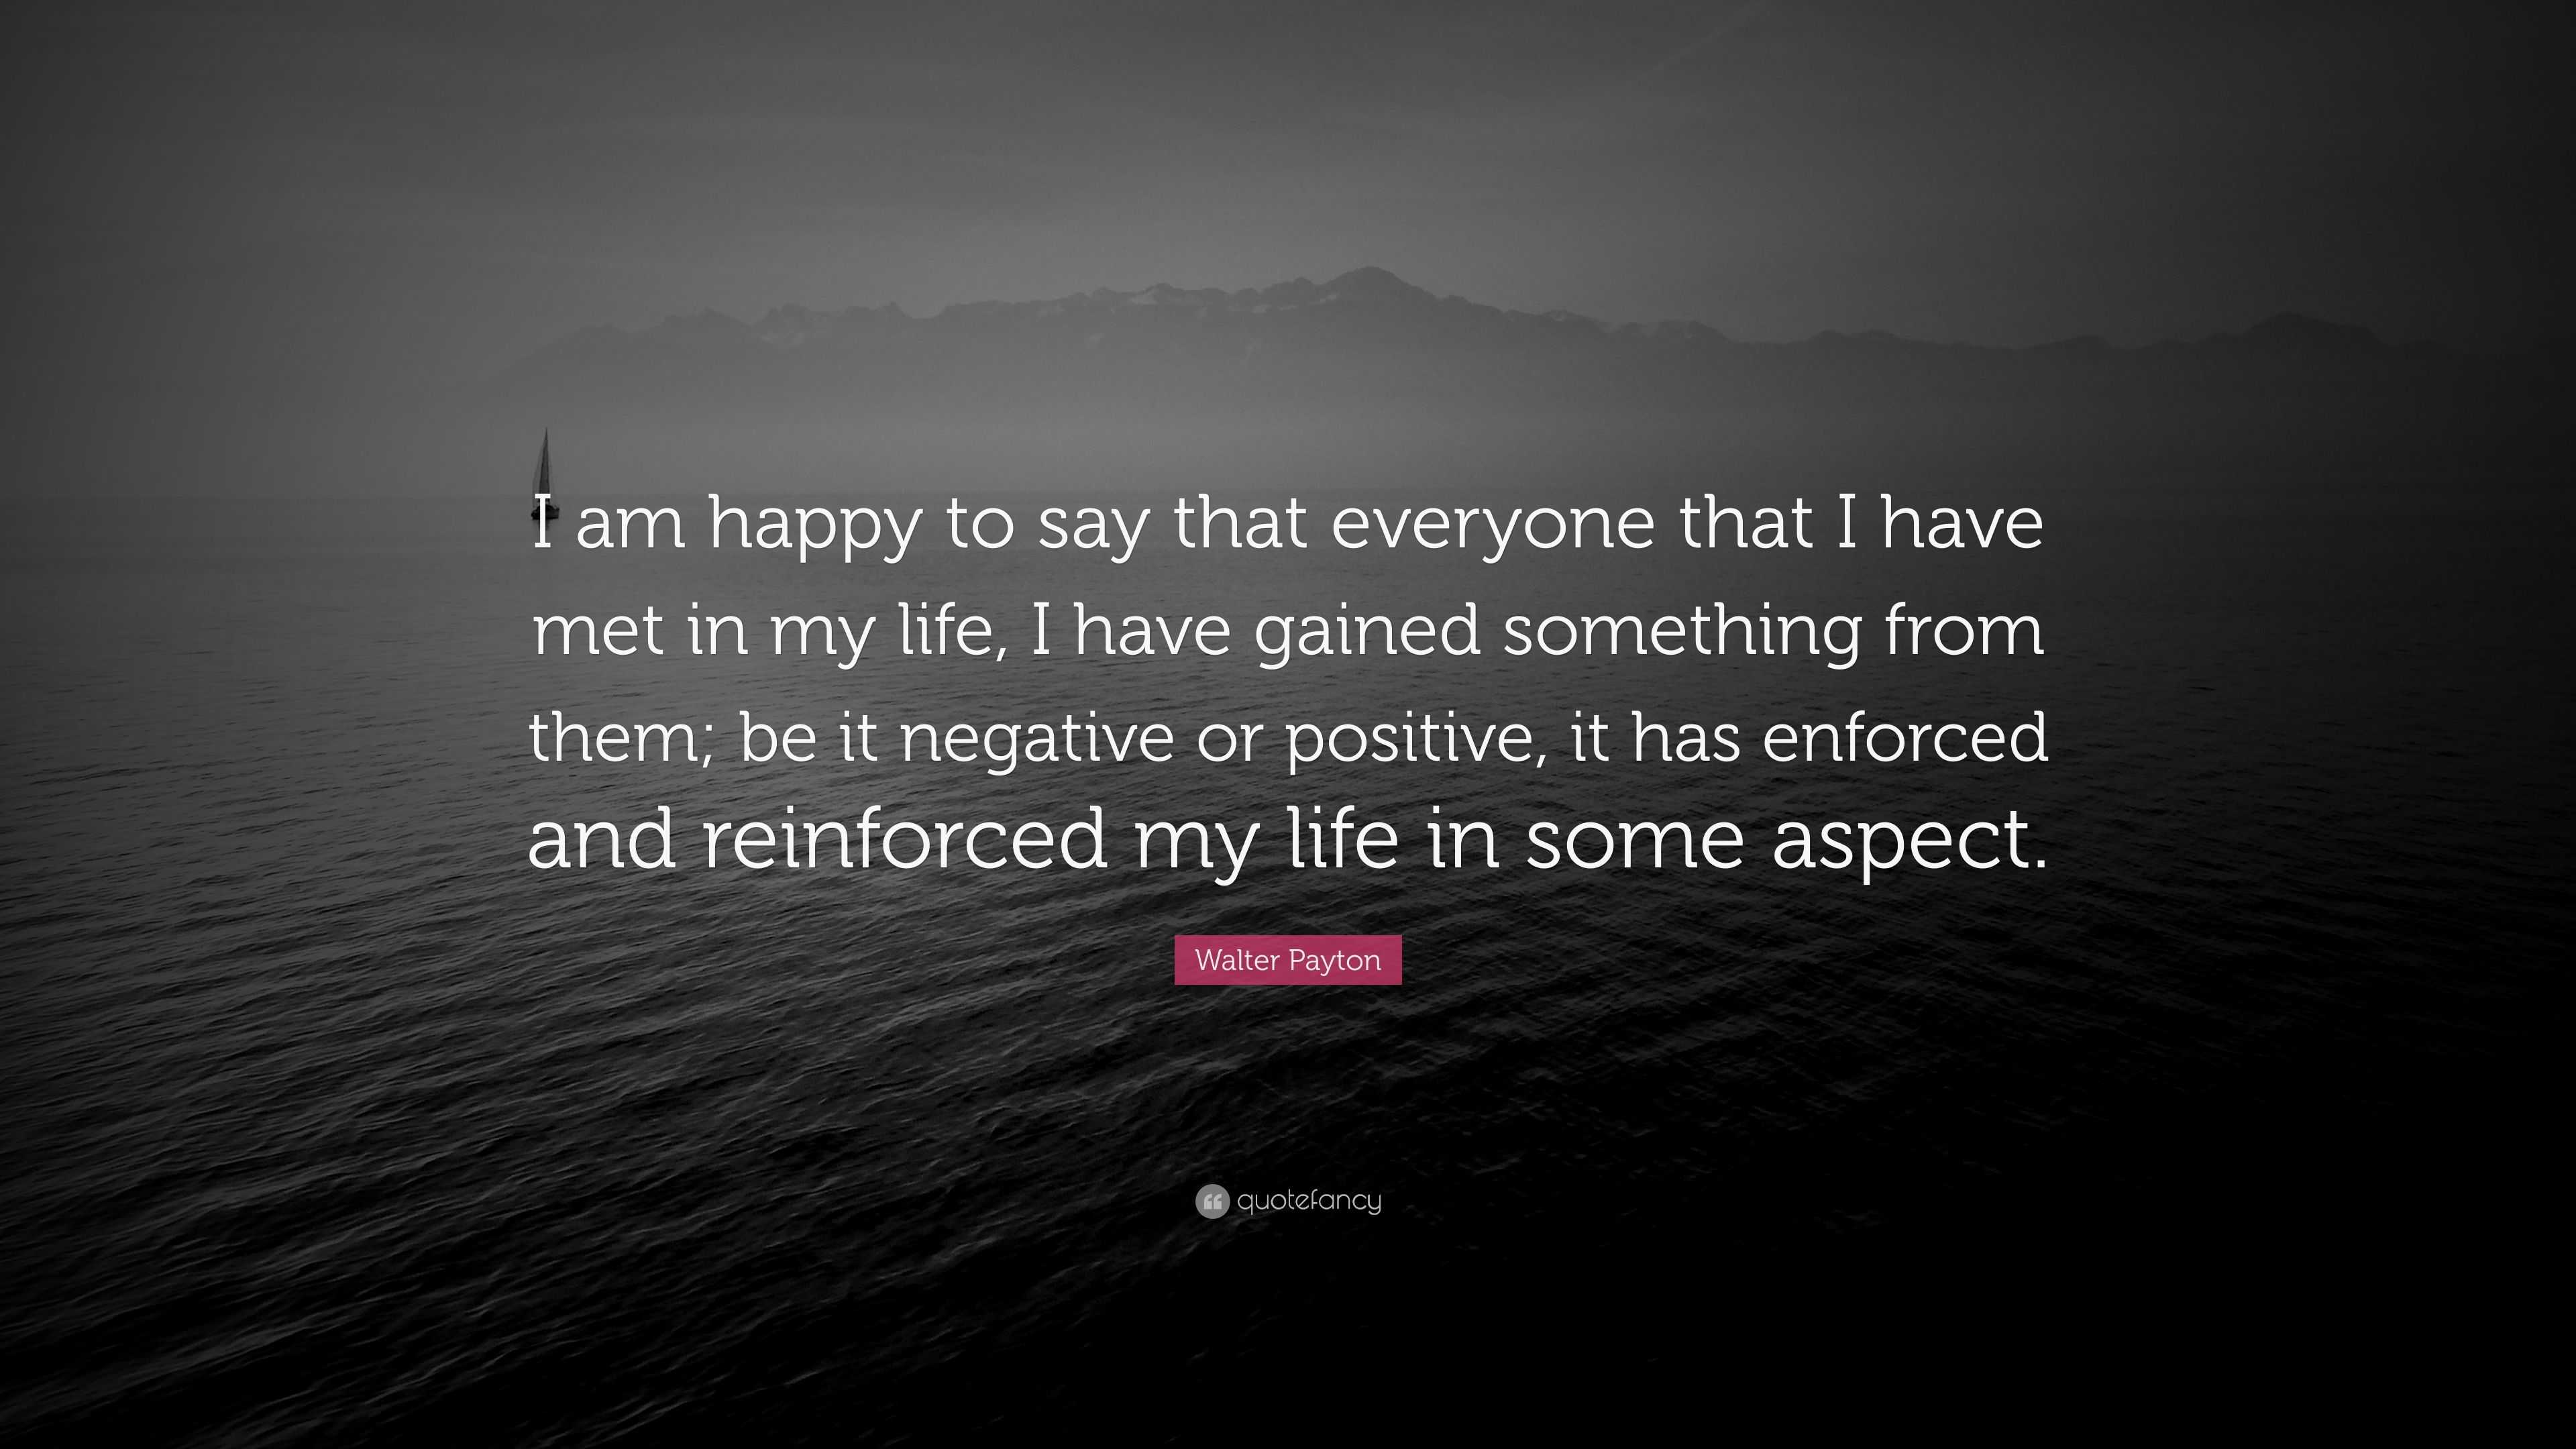 Walter Payton Quote I Am Happy To Say That Everyone That I Have Met In My Life I Have Gained Something From Them Be It Negative Or Positiv